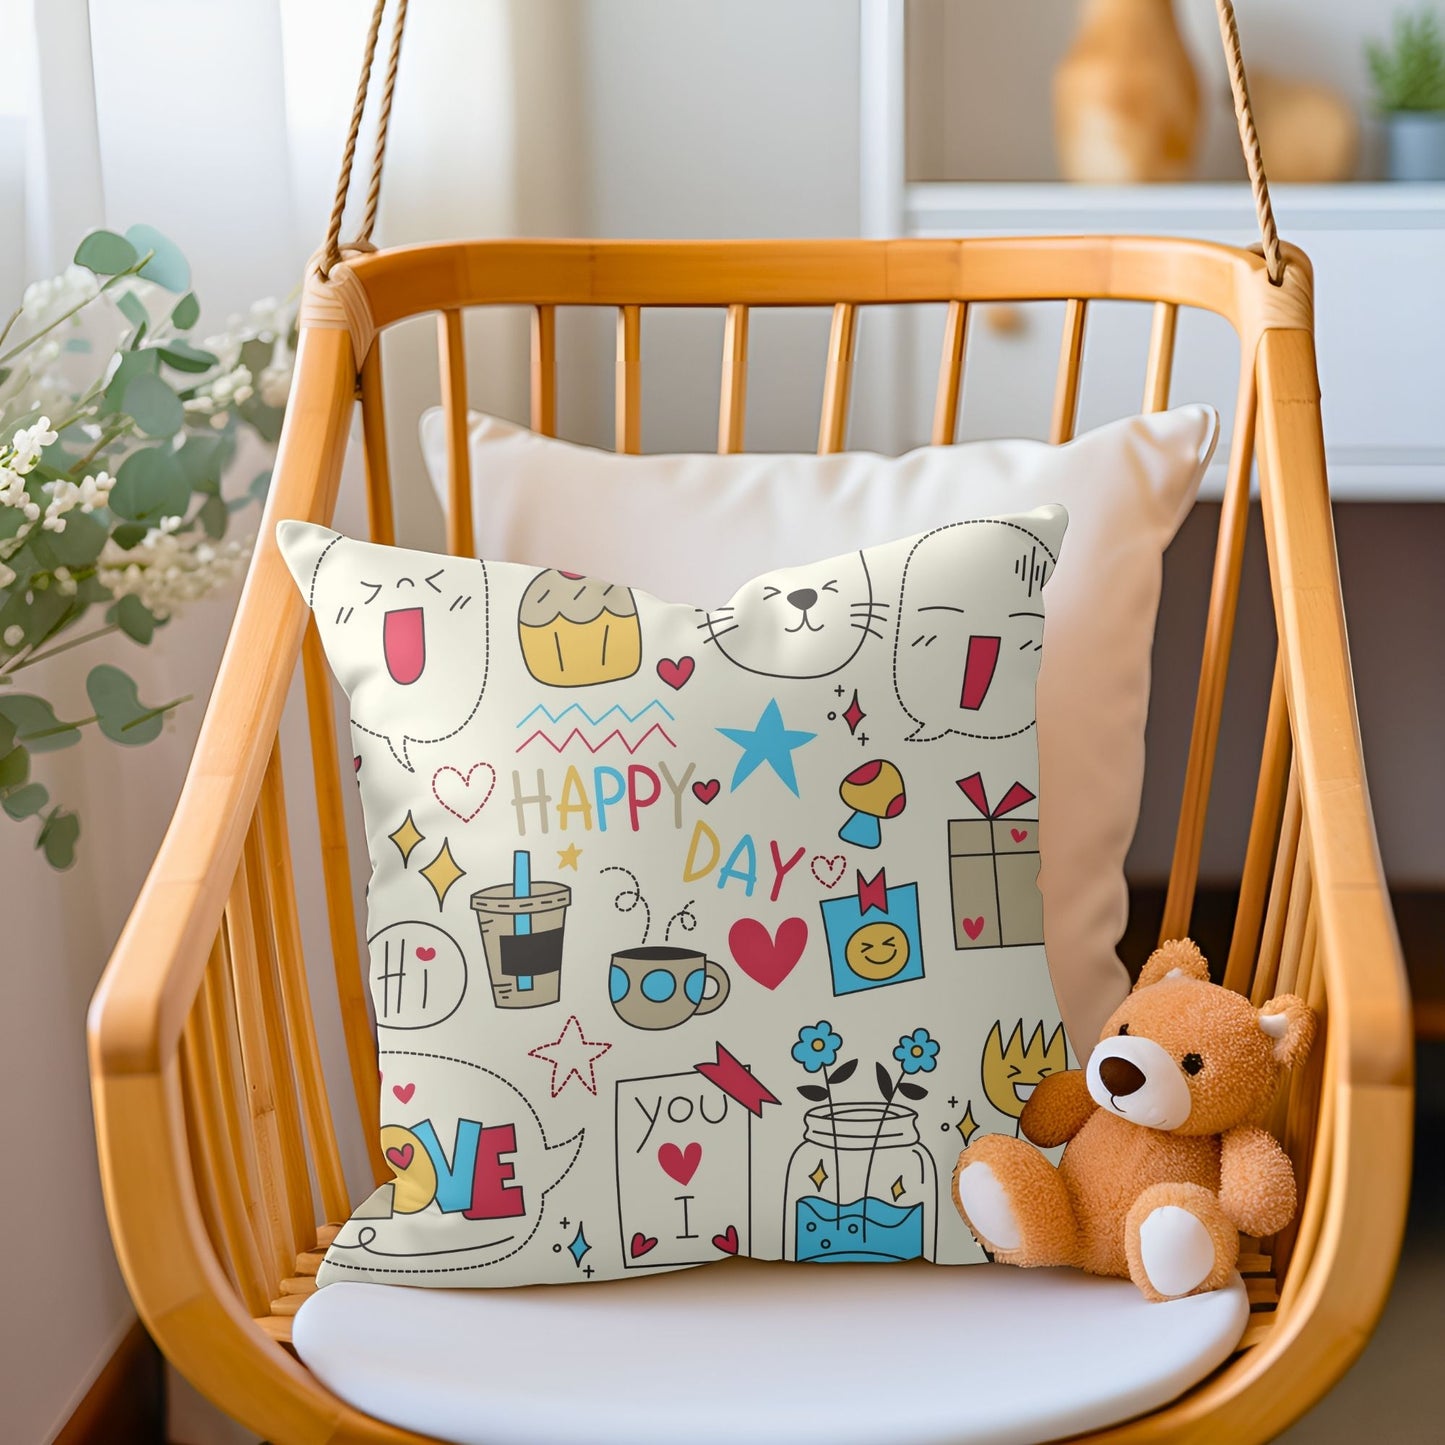 Vibrant kids pillow with a happy and colorful design for a cheerful ambiance.